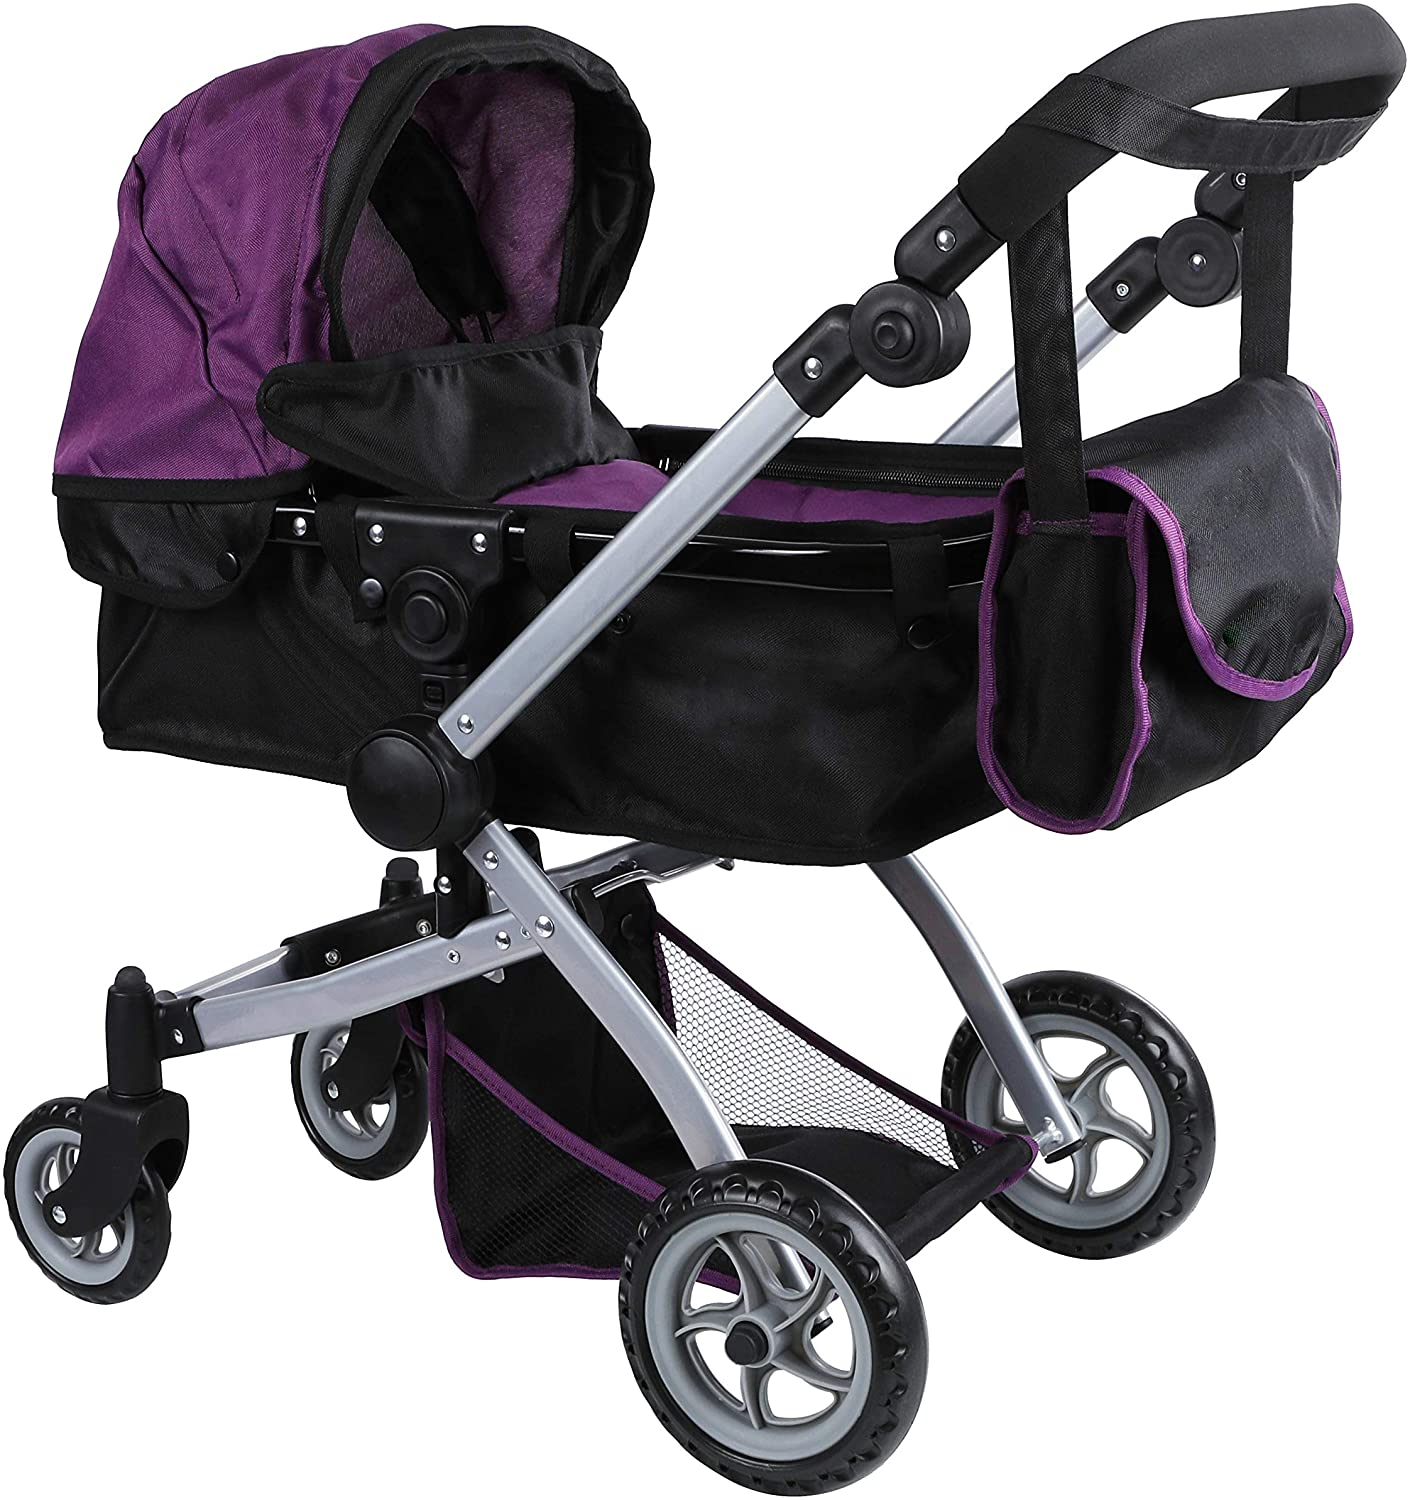 what is the difference between pram and stroller